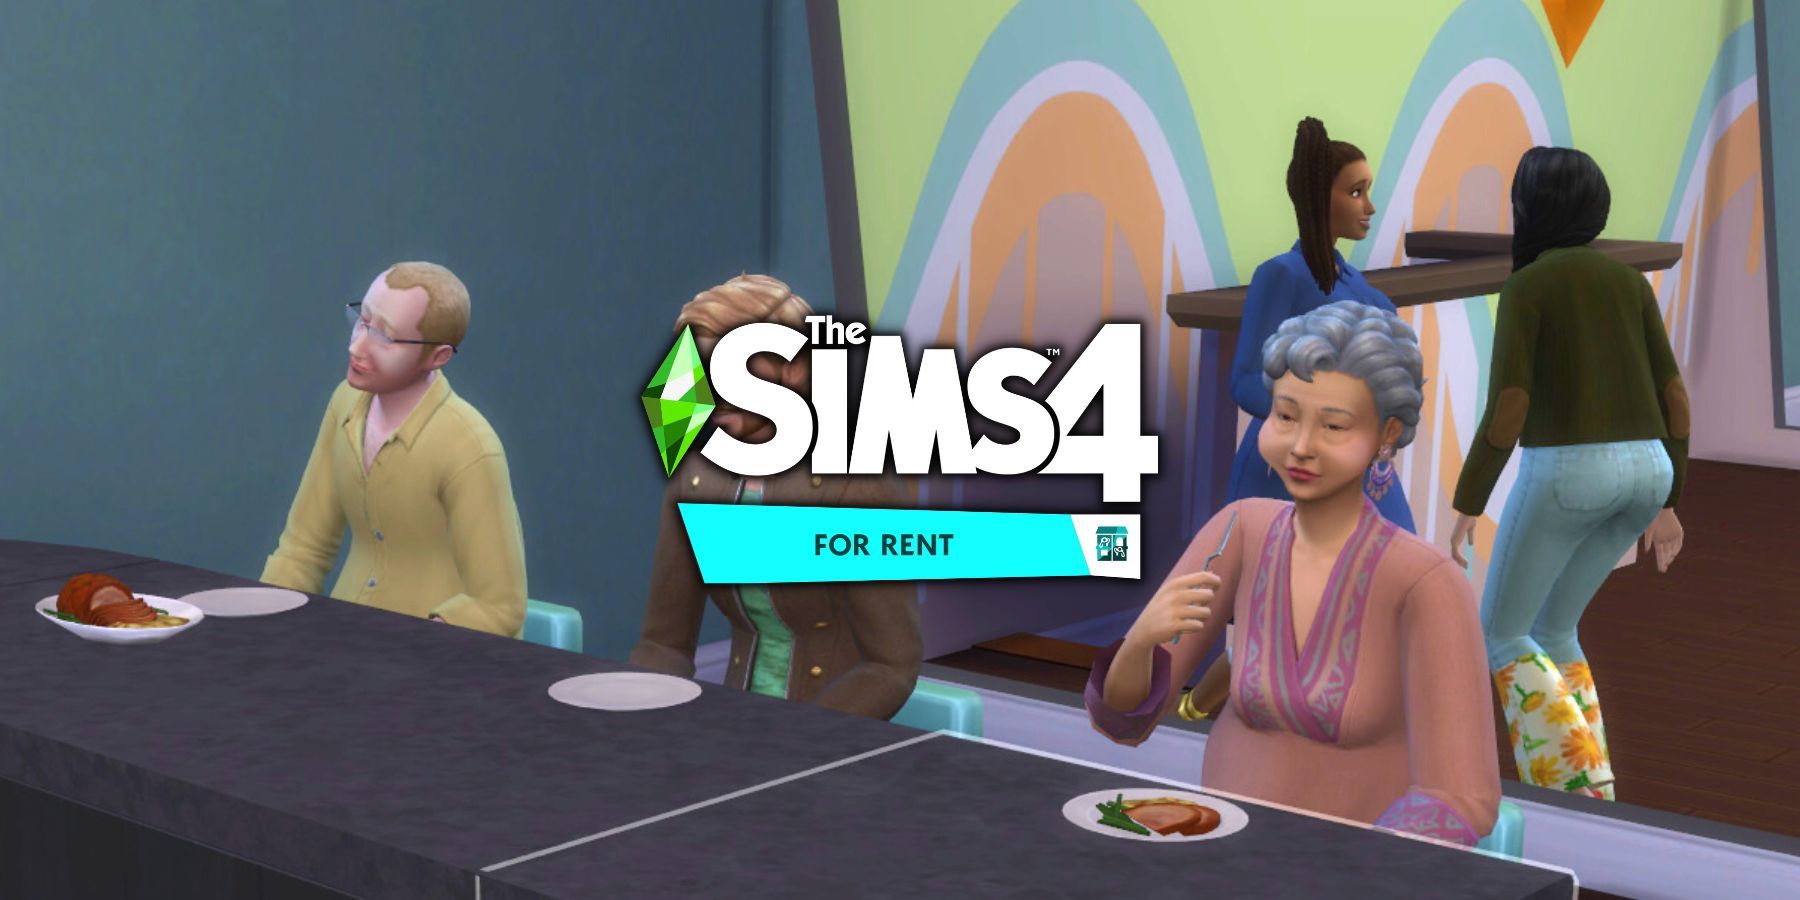 The Sims 4 Rental